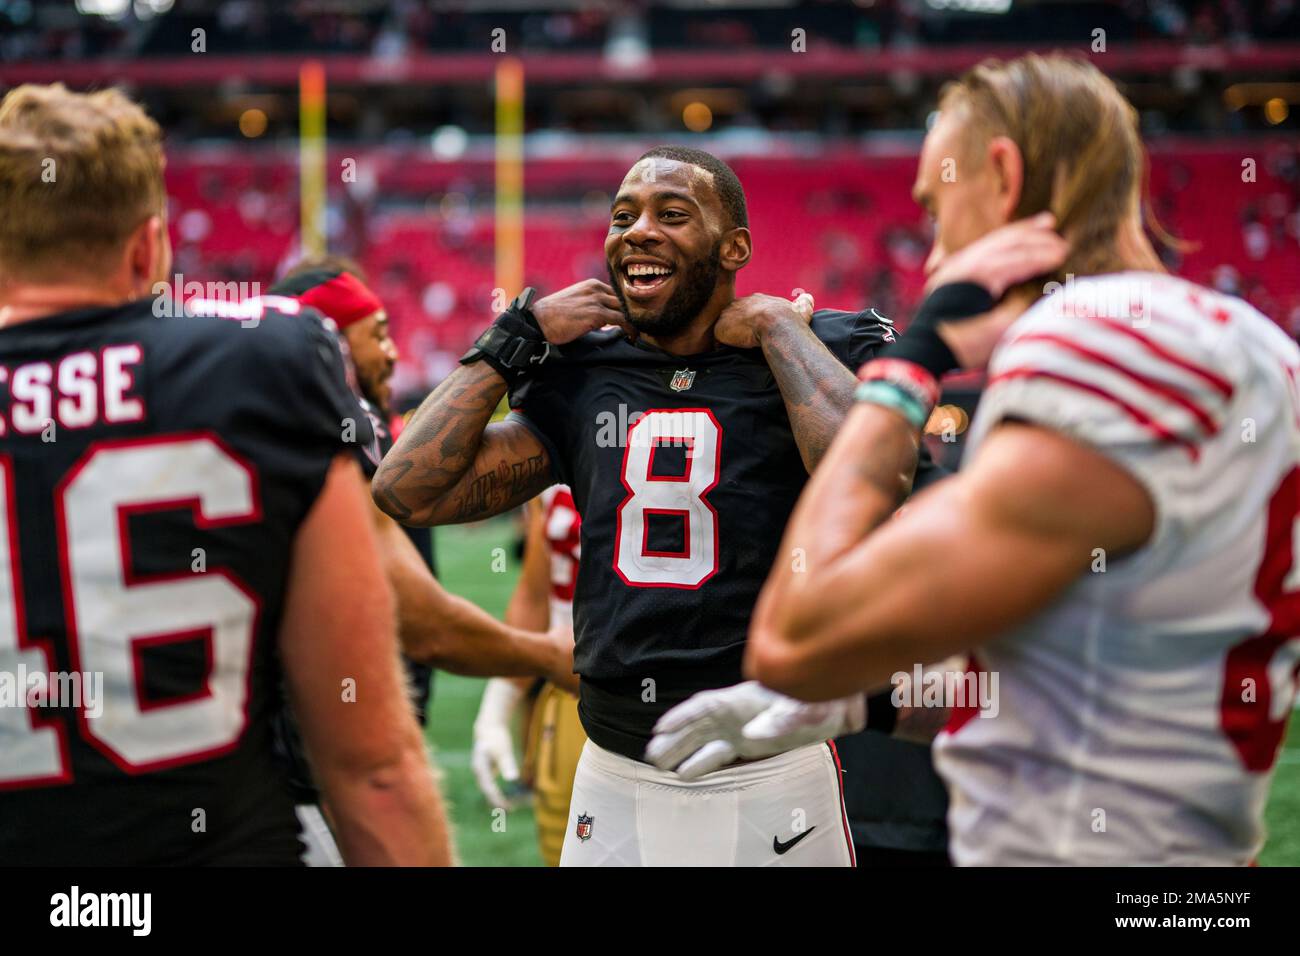 Atlanta Falcons tight end Kyle Pitts (8) participates in a jersey swap  after an NFL football game against the San Francisco 49ers, Sunday, Oct.  16, 2022, in Atlanta. The Atlanta Falcons won